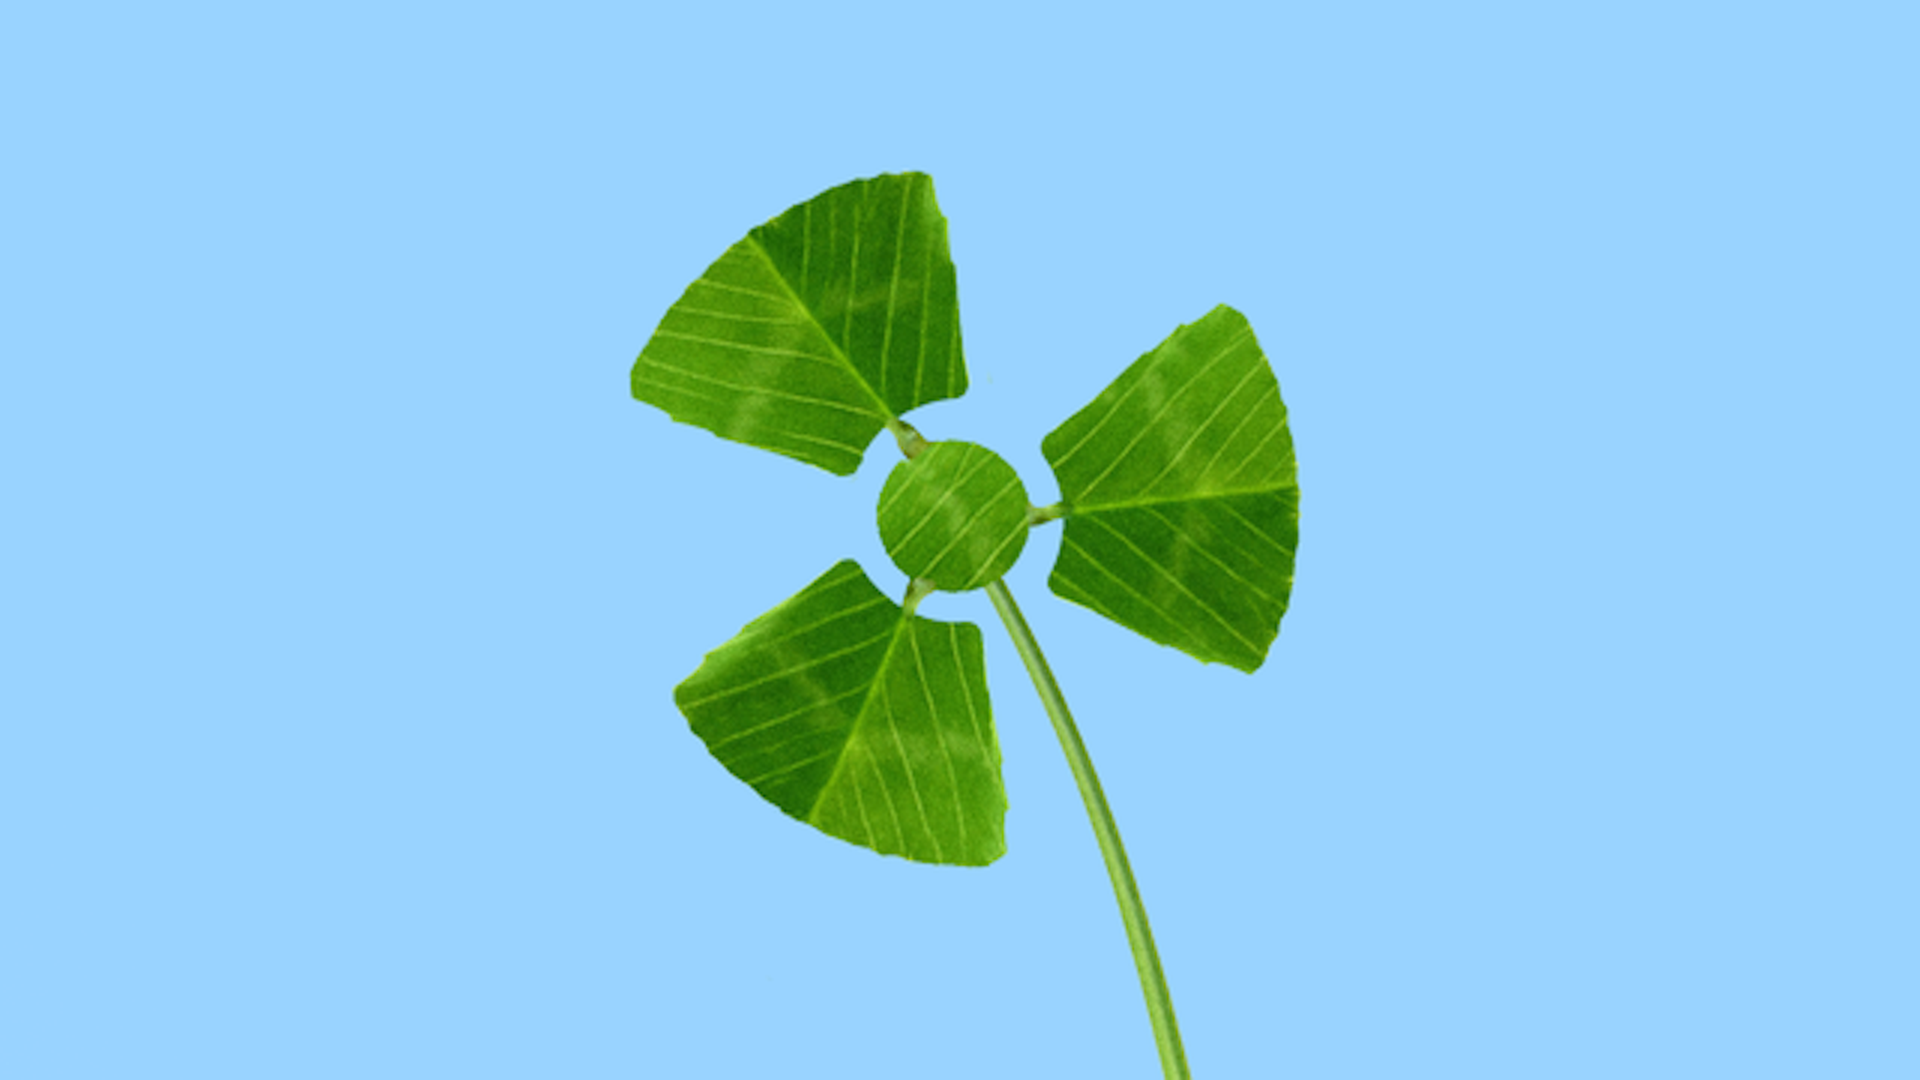 In this illustration, a three leaf clover is shaped like a nuclear power symbol. 